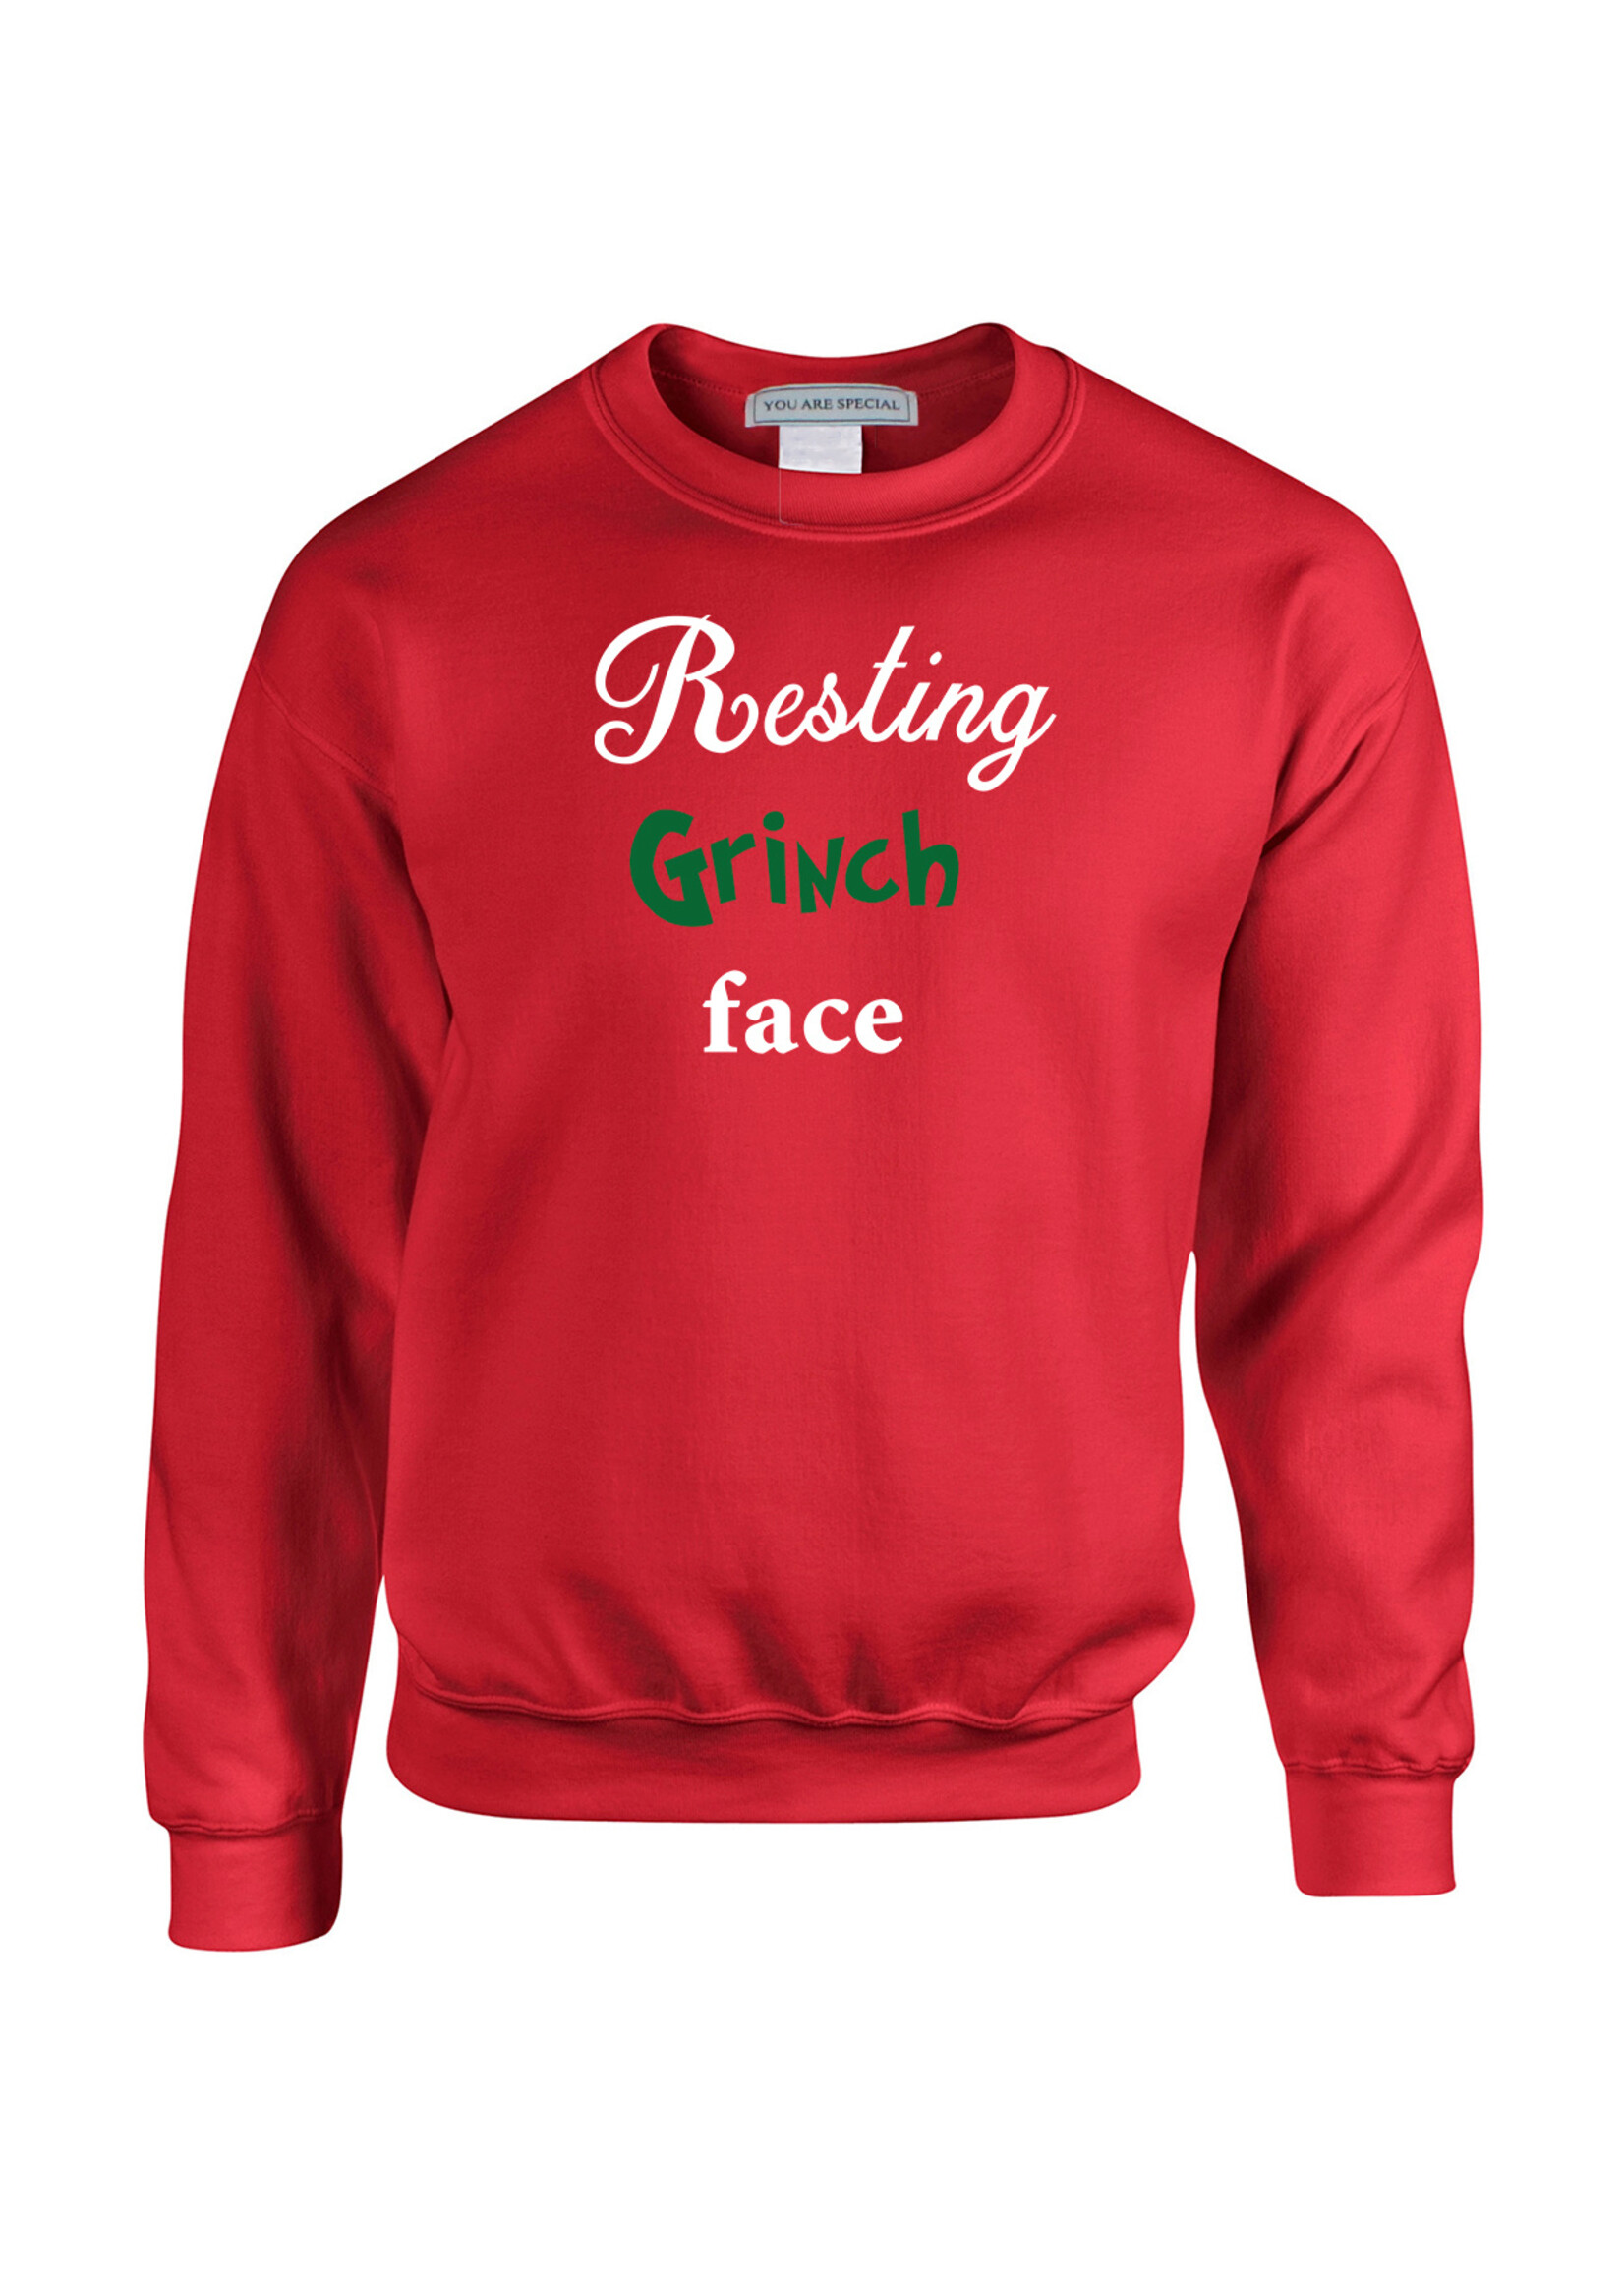 YOU ARE SPECIAL "Resting Grinch Face" Red Sweater